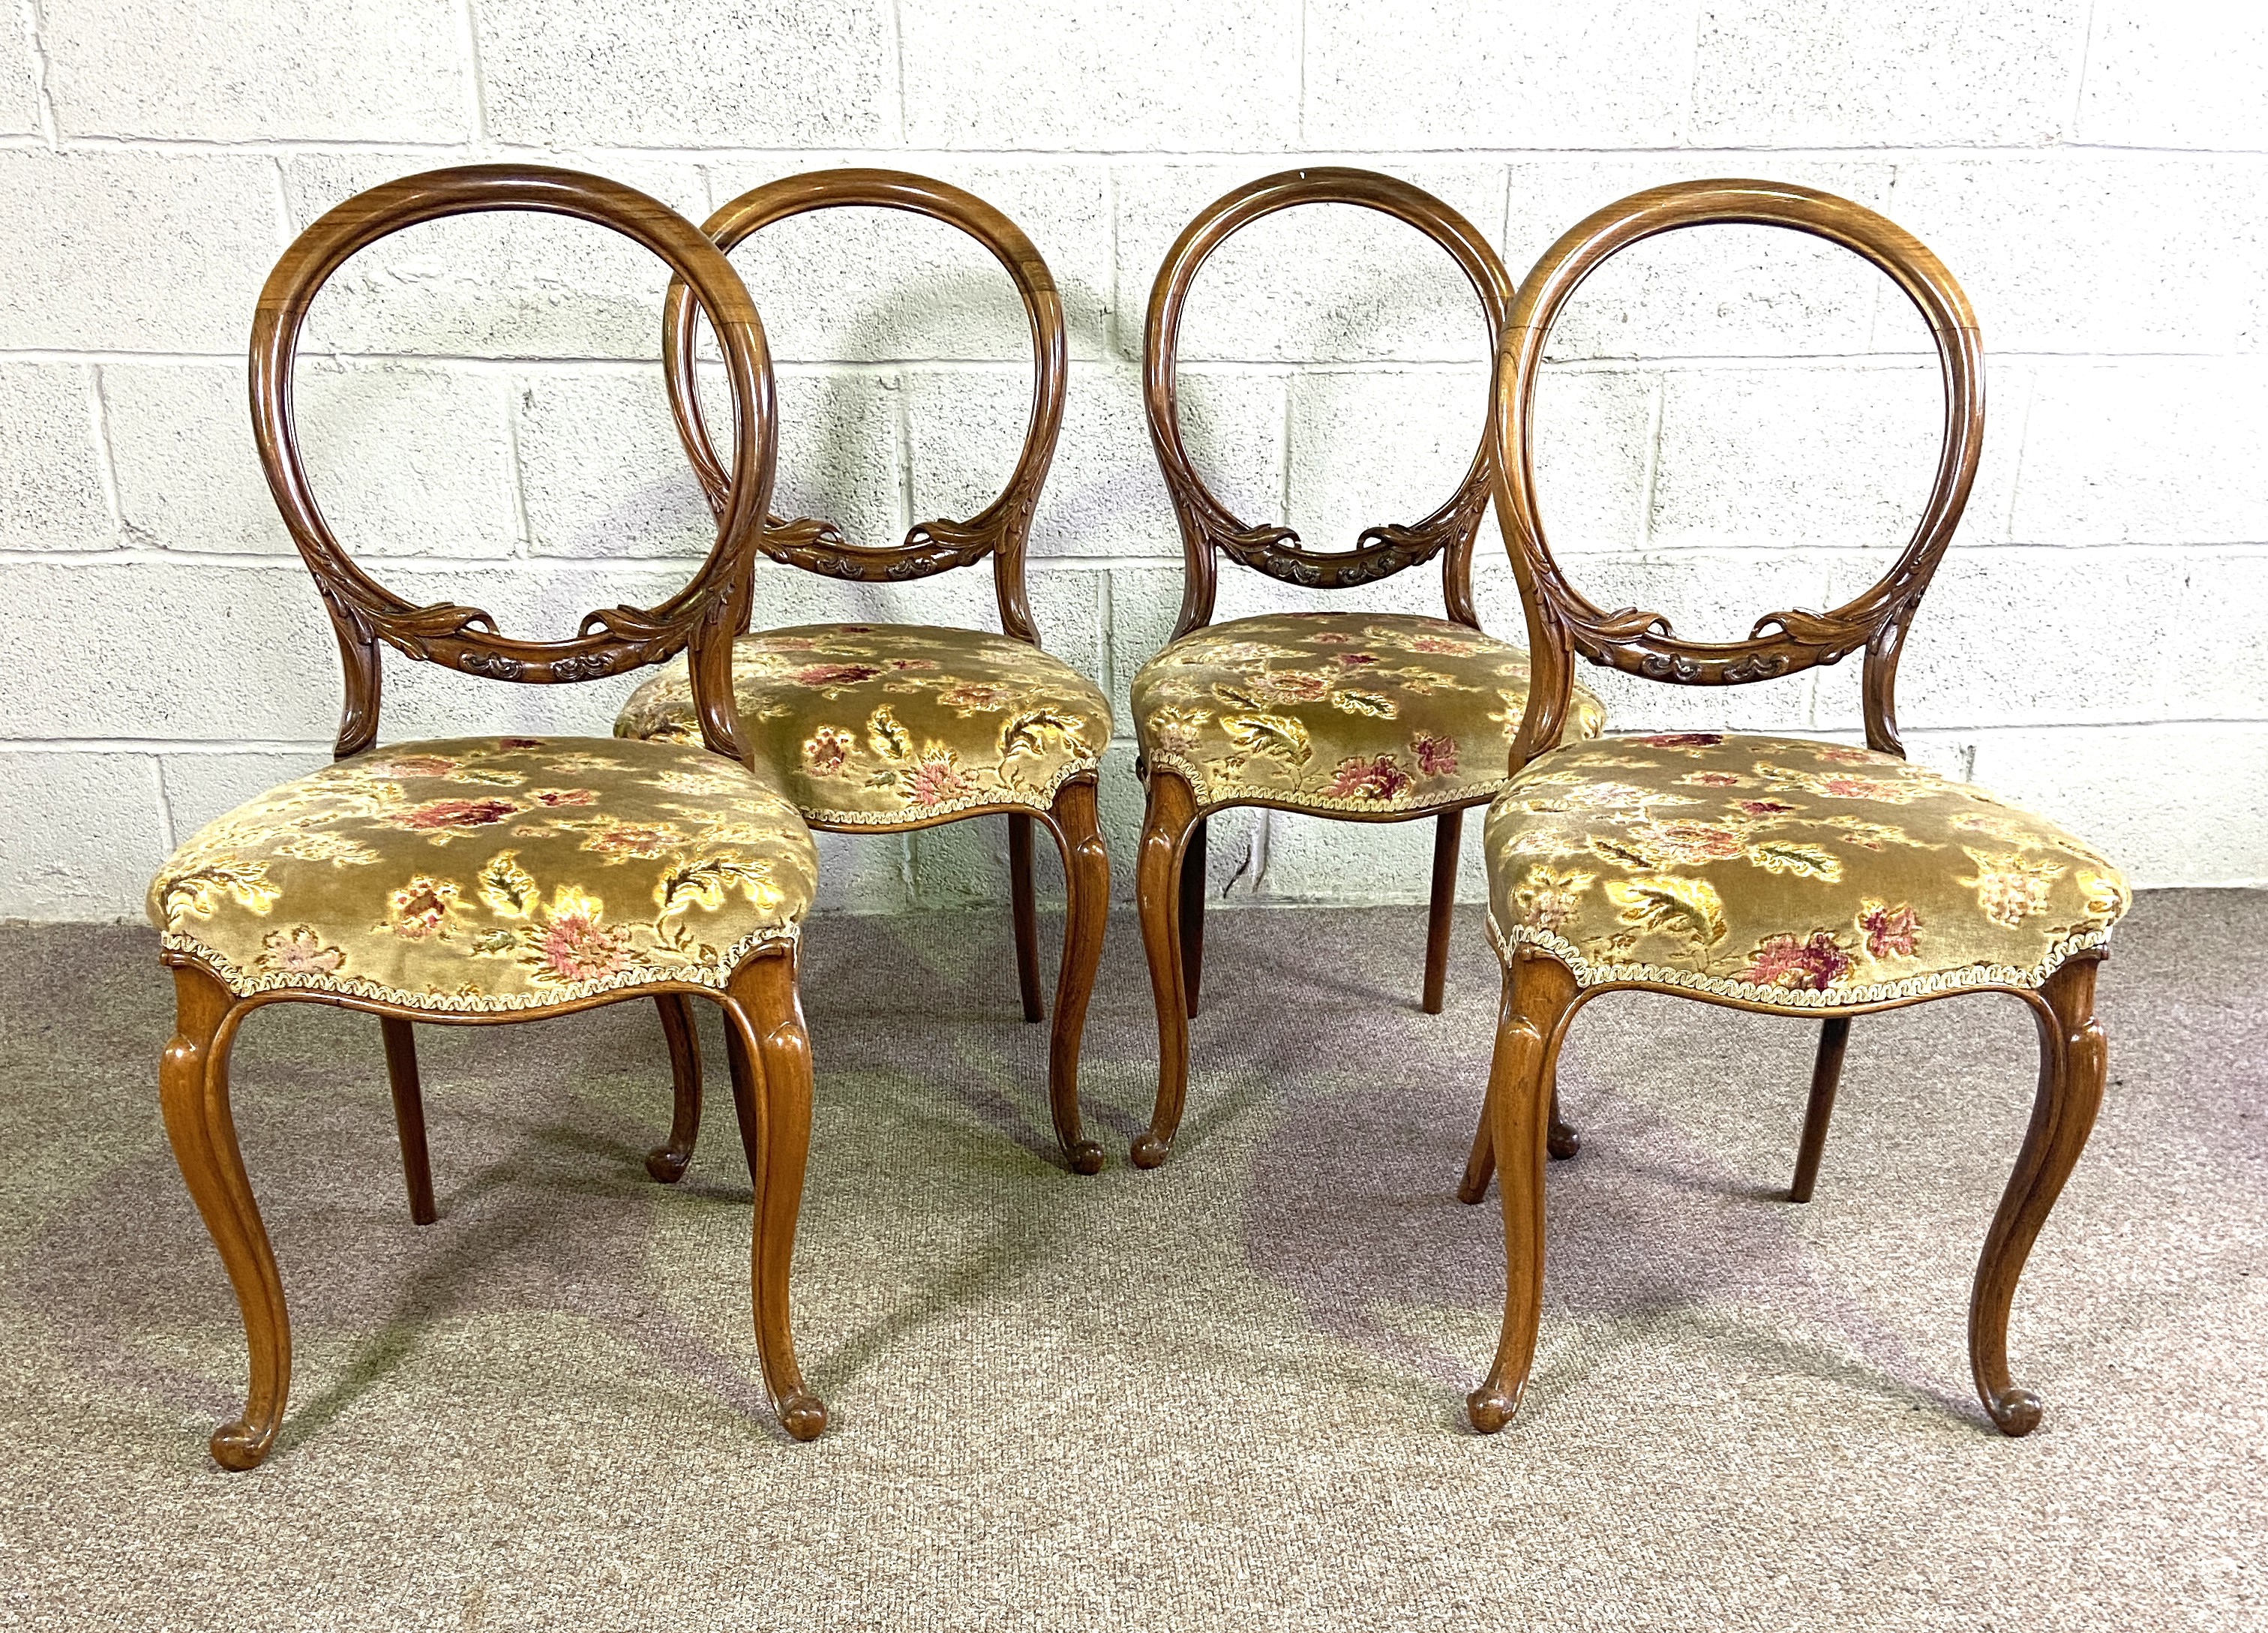 Four Victorian rosewood hoop-backed dining chairs, with cabriole legs (4) - Image 2 of 6